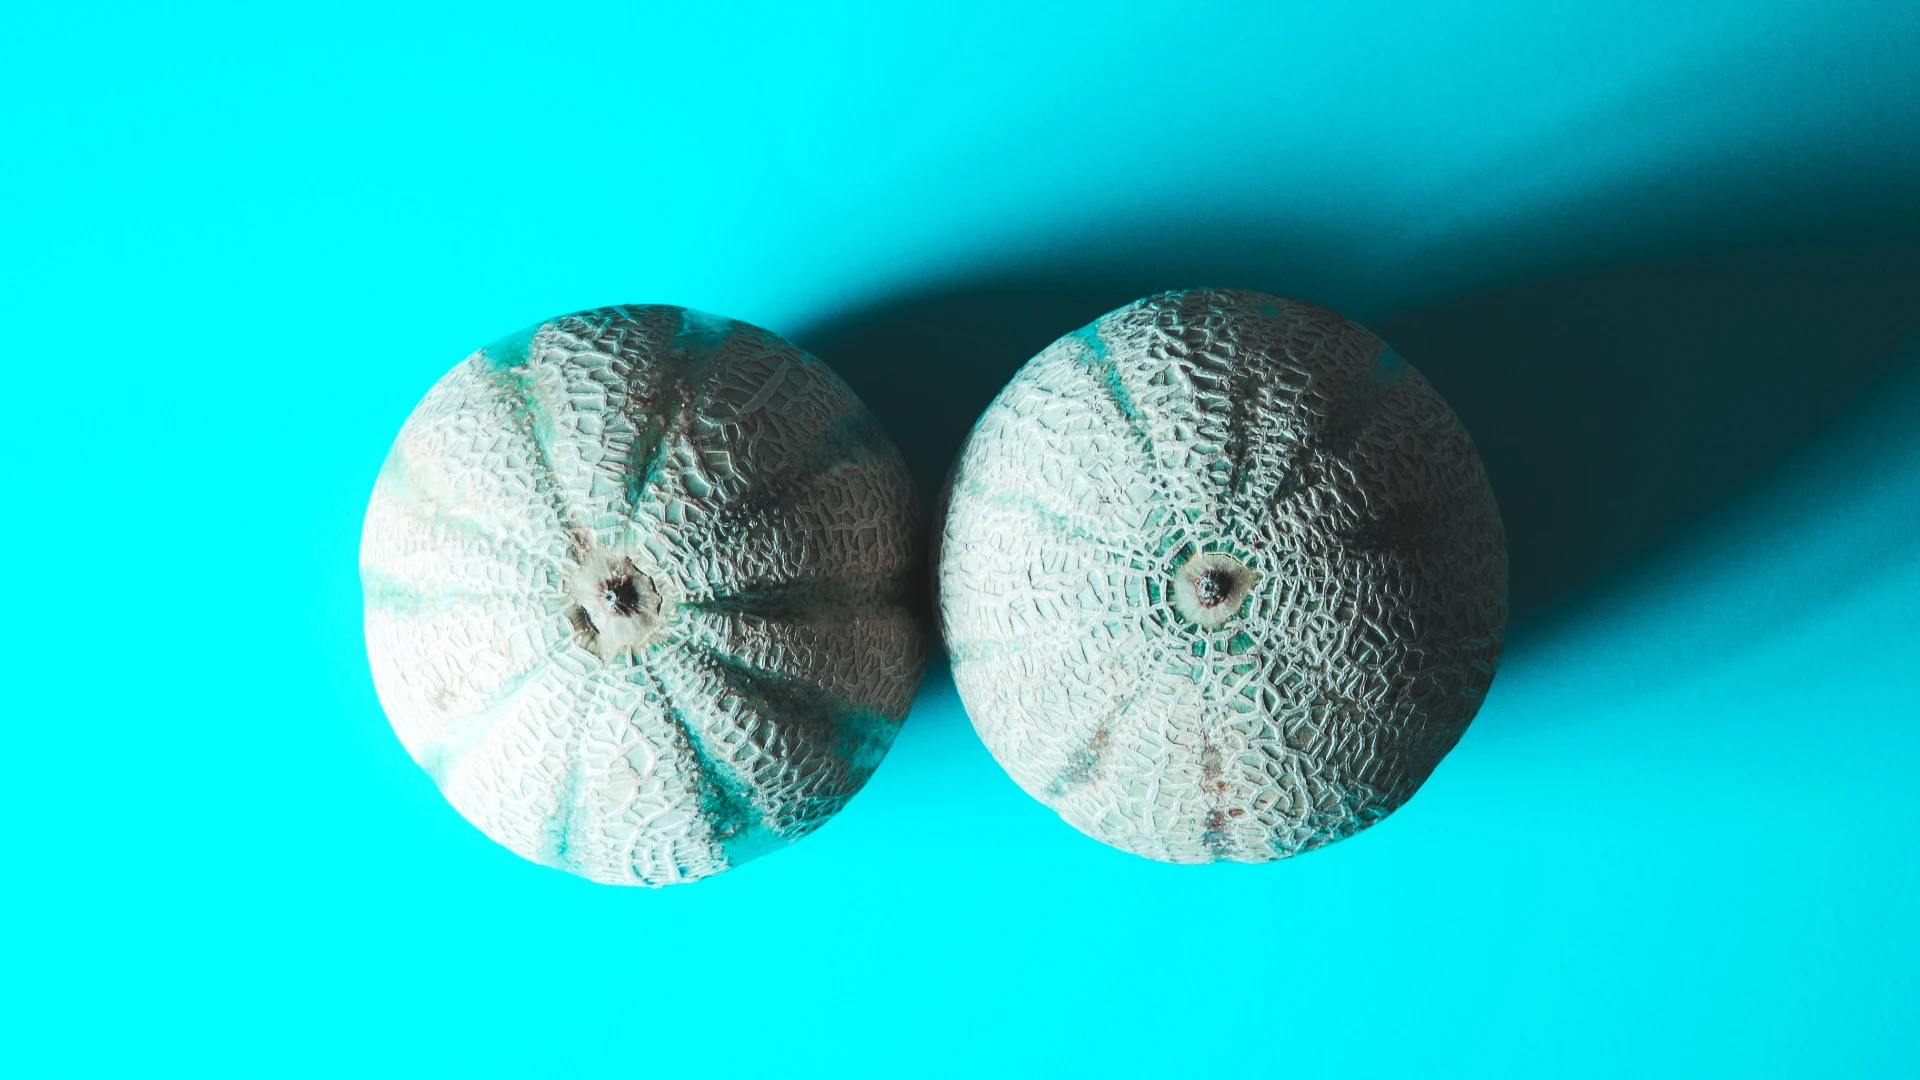 melons depicting breasts referring to mammograms